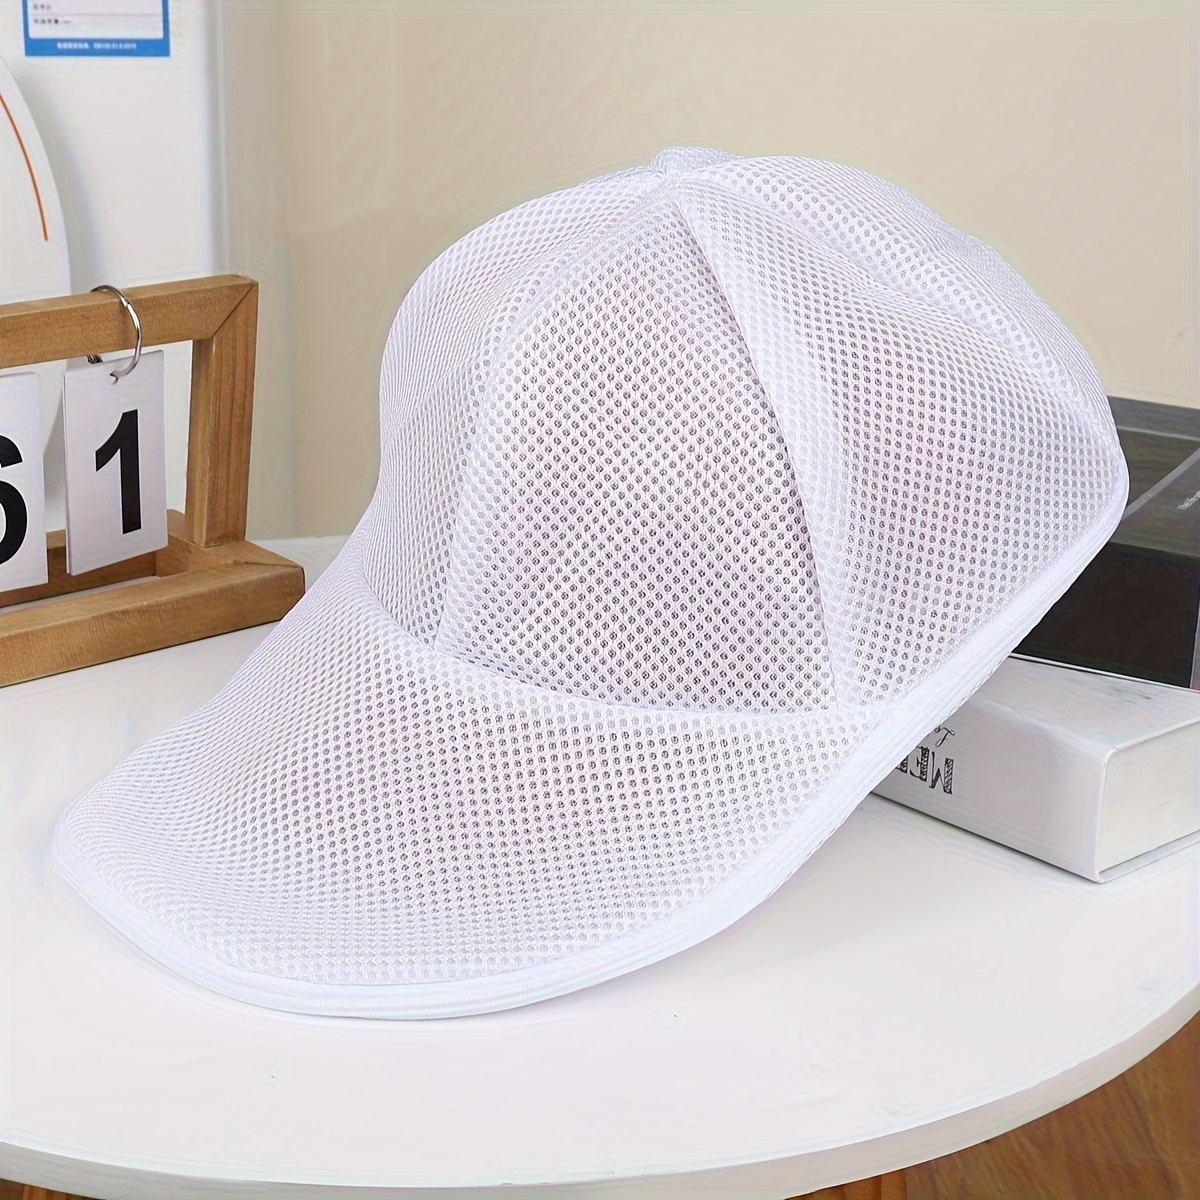 

1pc, Hat Washer For Washing Machine, Baseball Cap Cleaner/protector, Cage-style Cap Washing Rack, Unisex Cap Shaper, Made Of Polyester Fiber, White